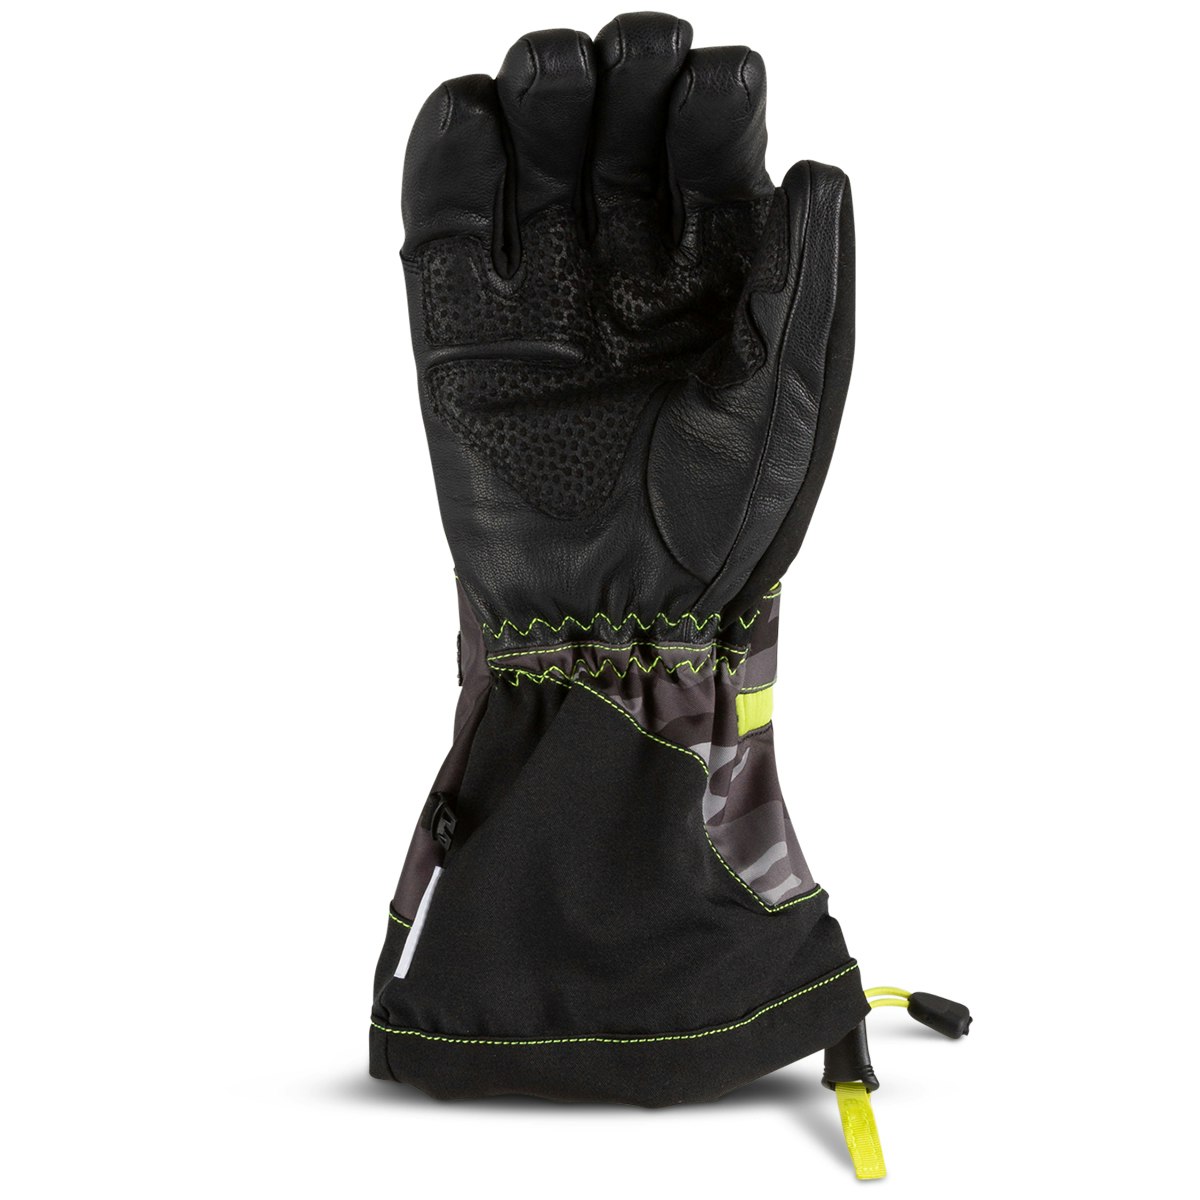 509 Backcountry Gloves - Black Camo - Actionstore